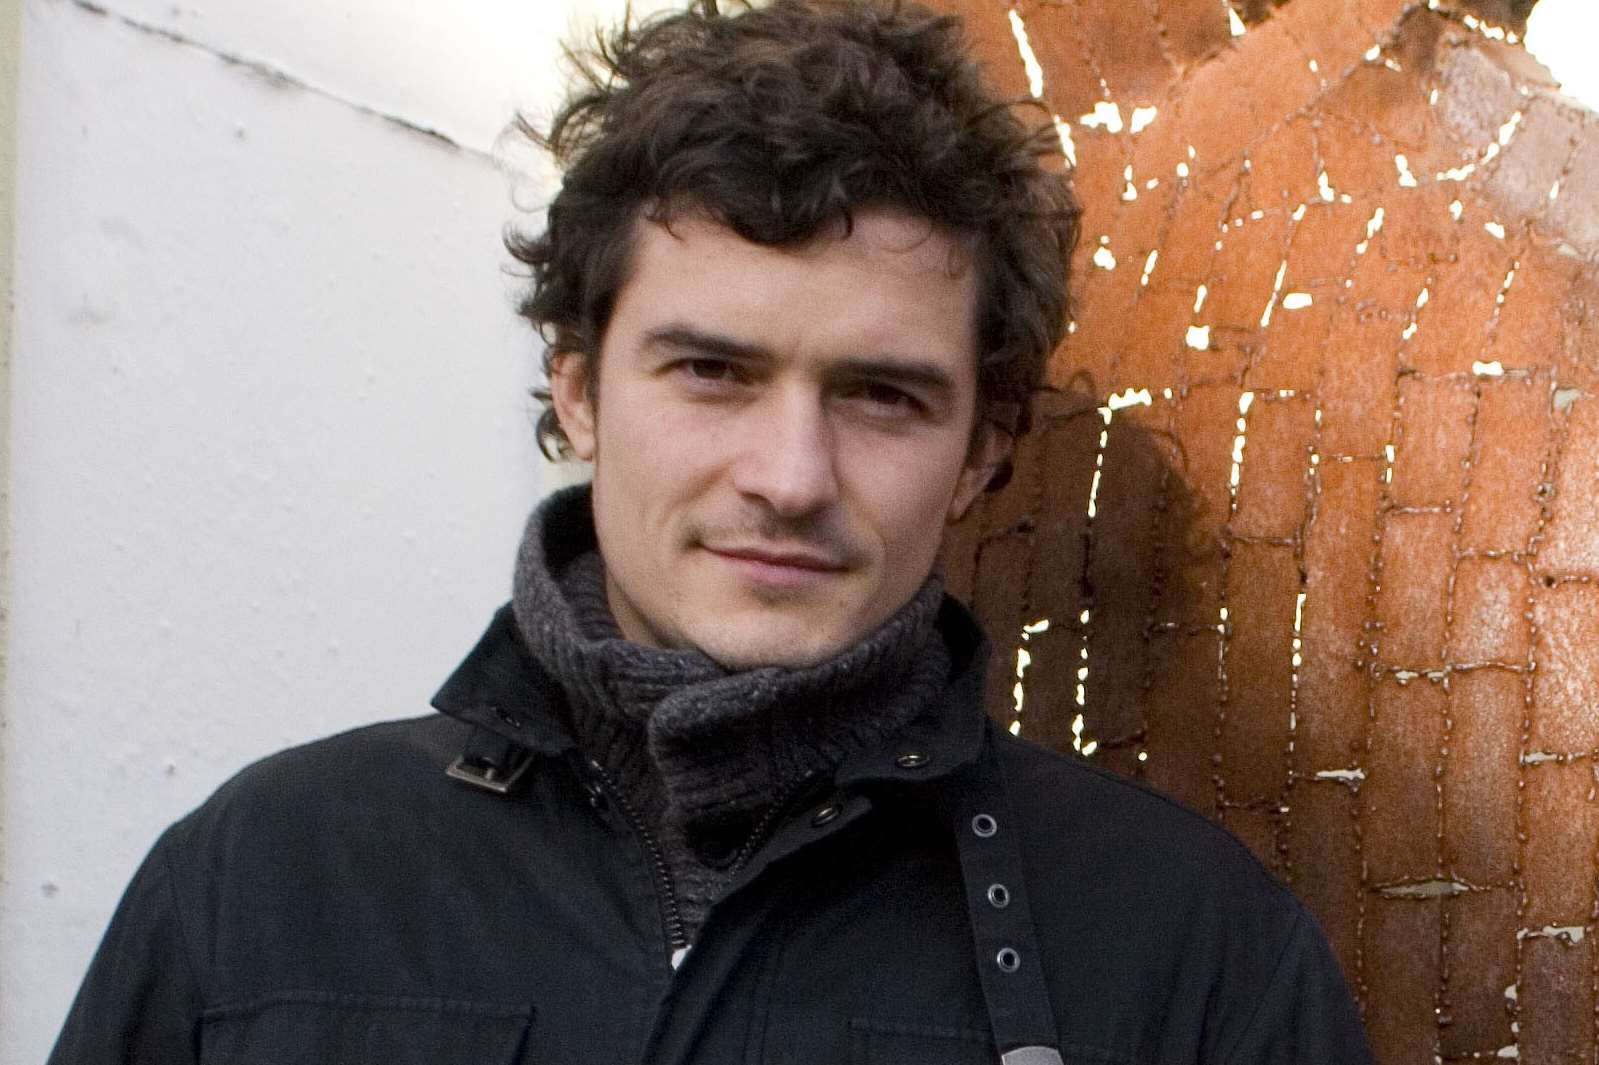 Orlando Bloom's controversial "pikey" comment drew widespread criticism